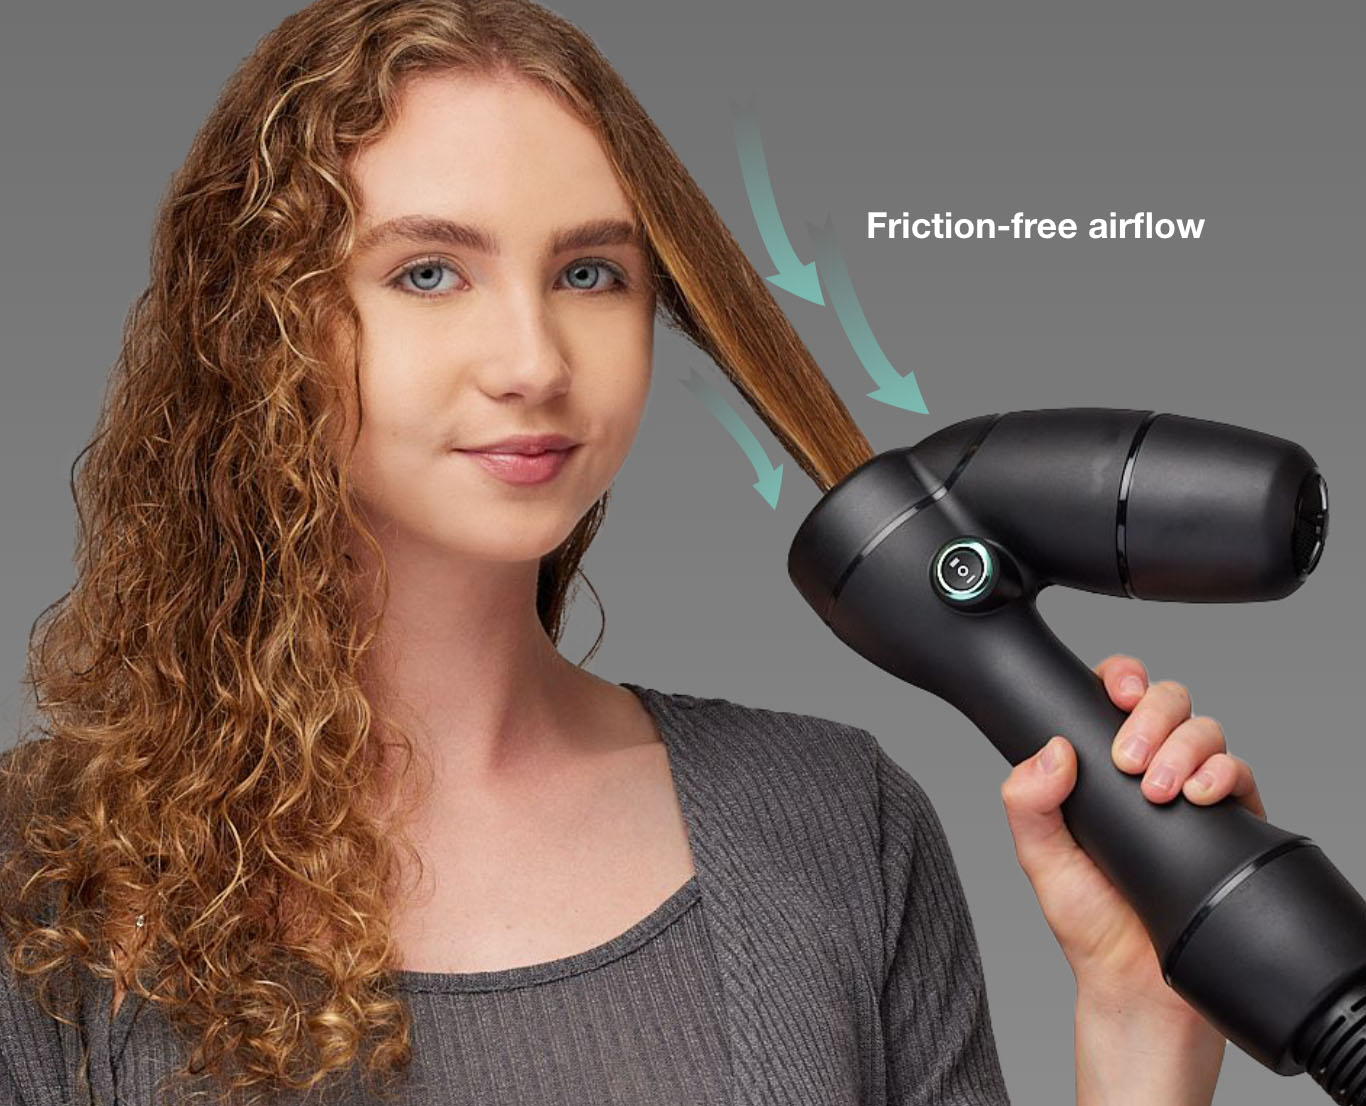 Woman with curly hair using the RevAir wand, with the words: Friction-free airflow and arrows showing reverse air direction